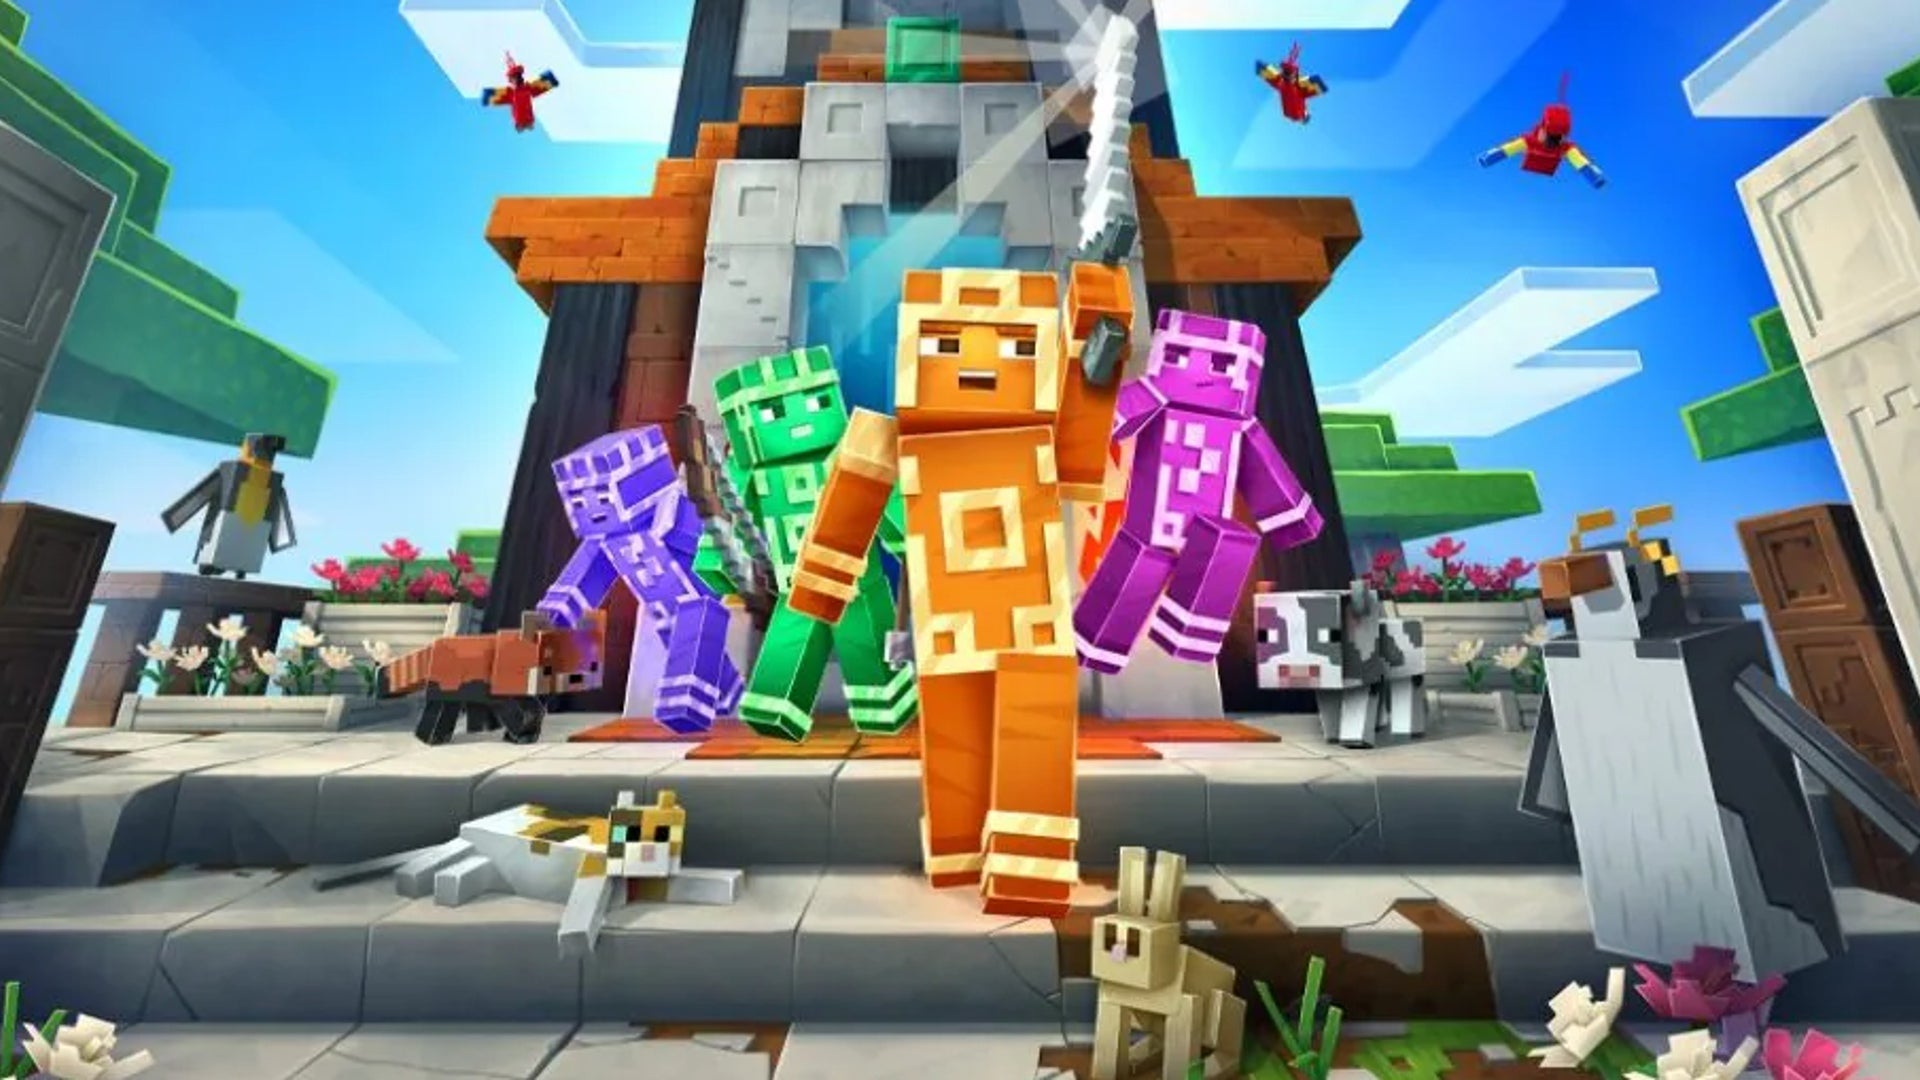 Minecraft Dungeons' Fauna Faire update adds multiplayer to its roguelike Tower mode on October 19th, 2022.